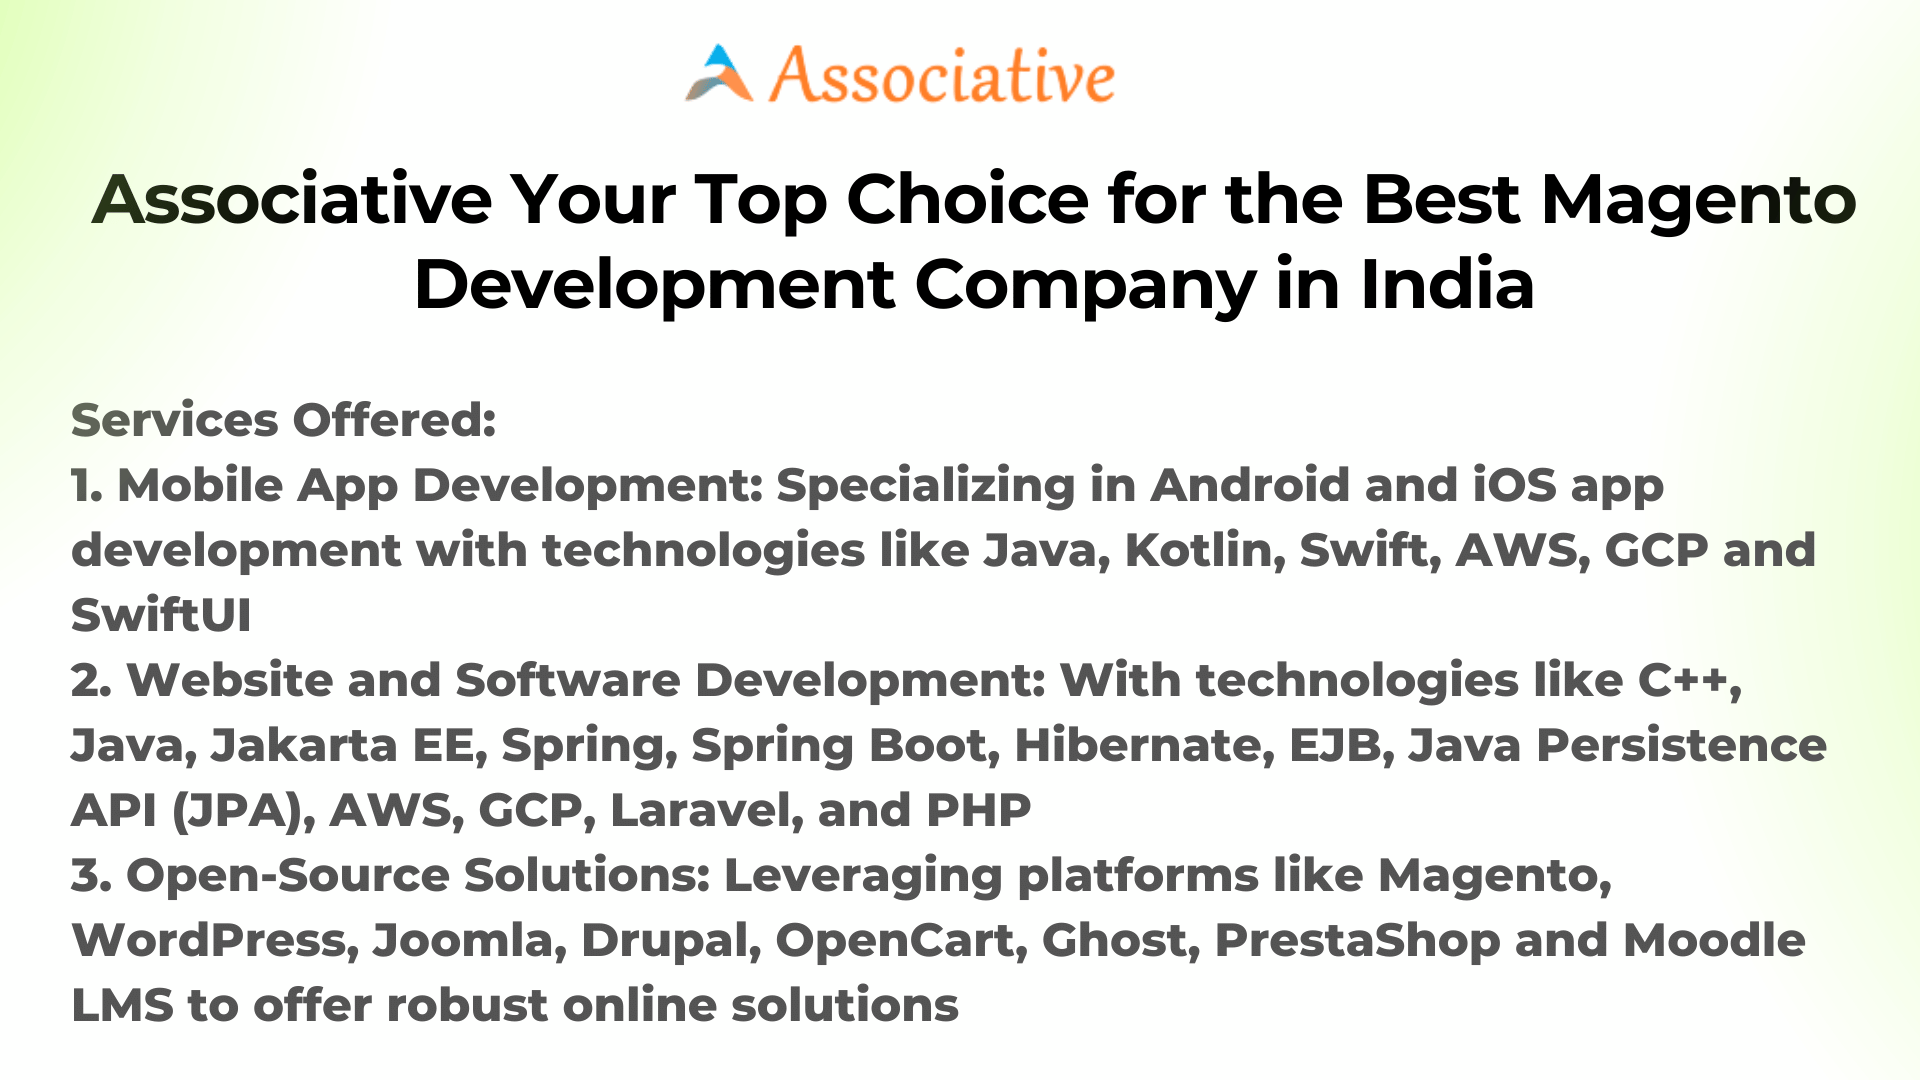 Associative Your Top Choice for the Best Magento Development Company in India